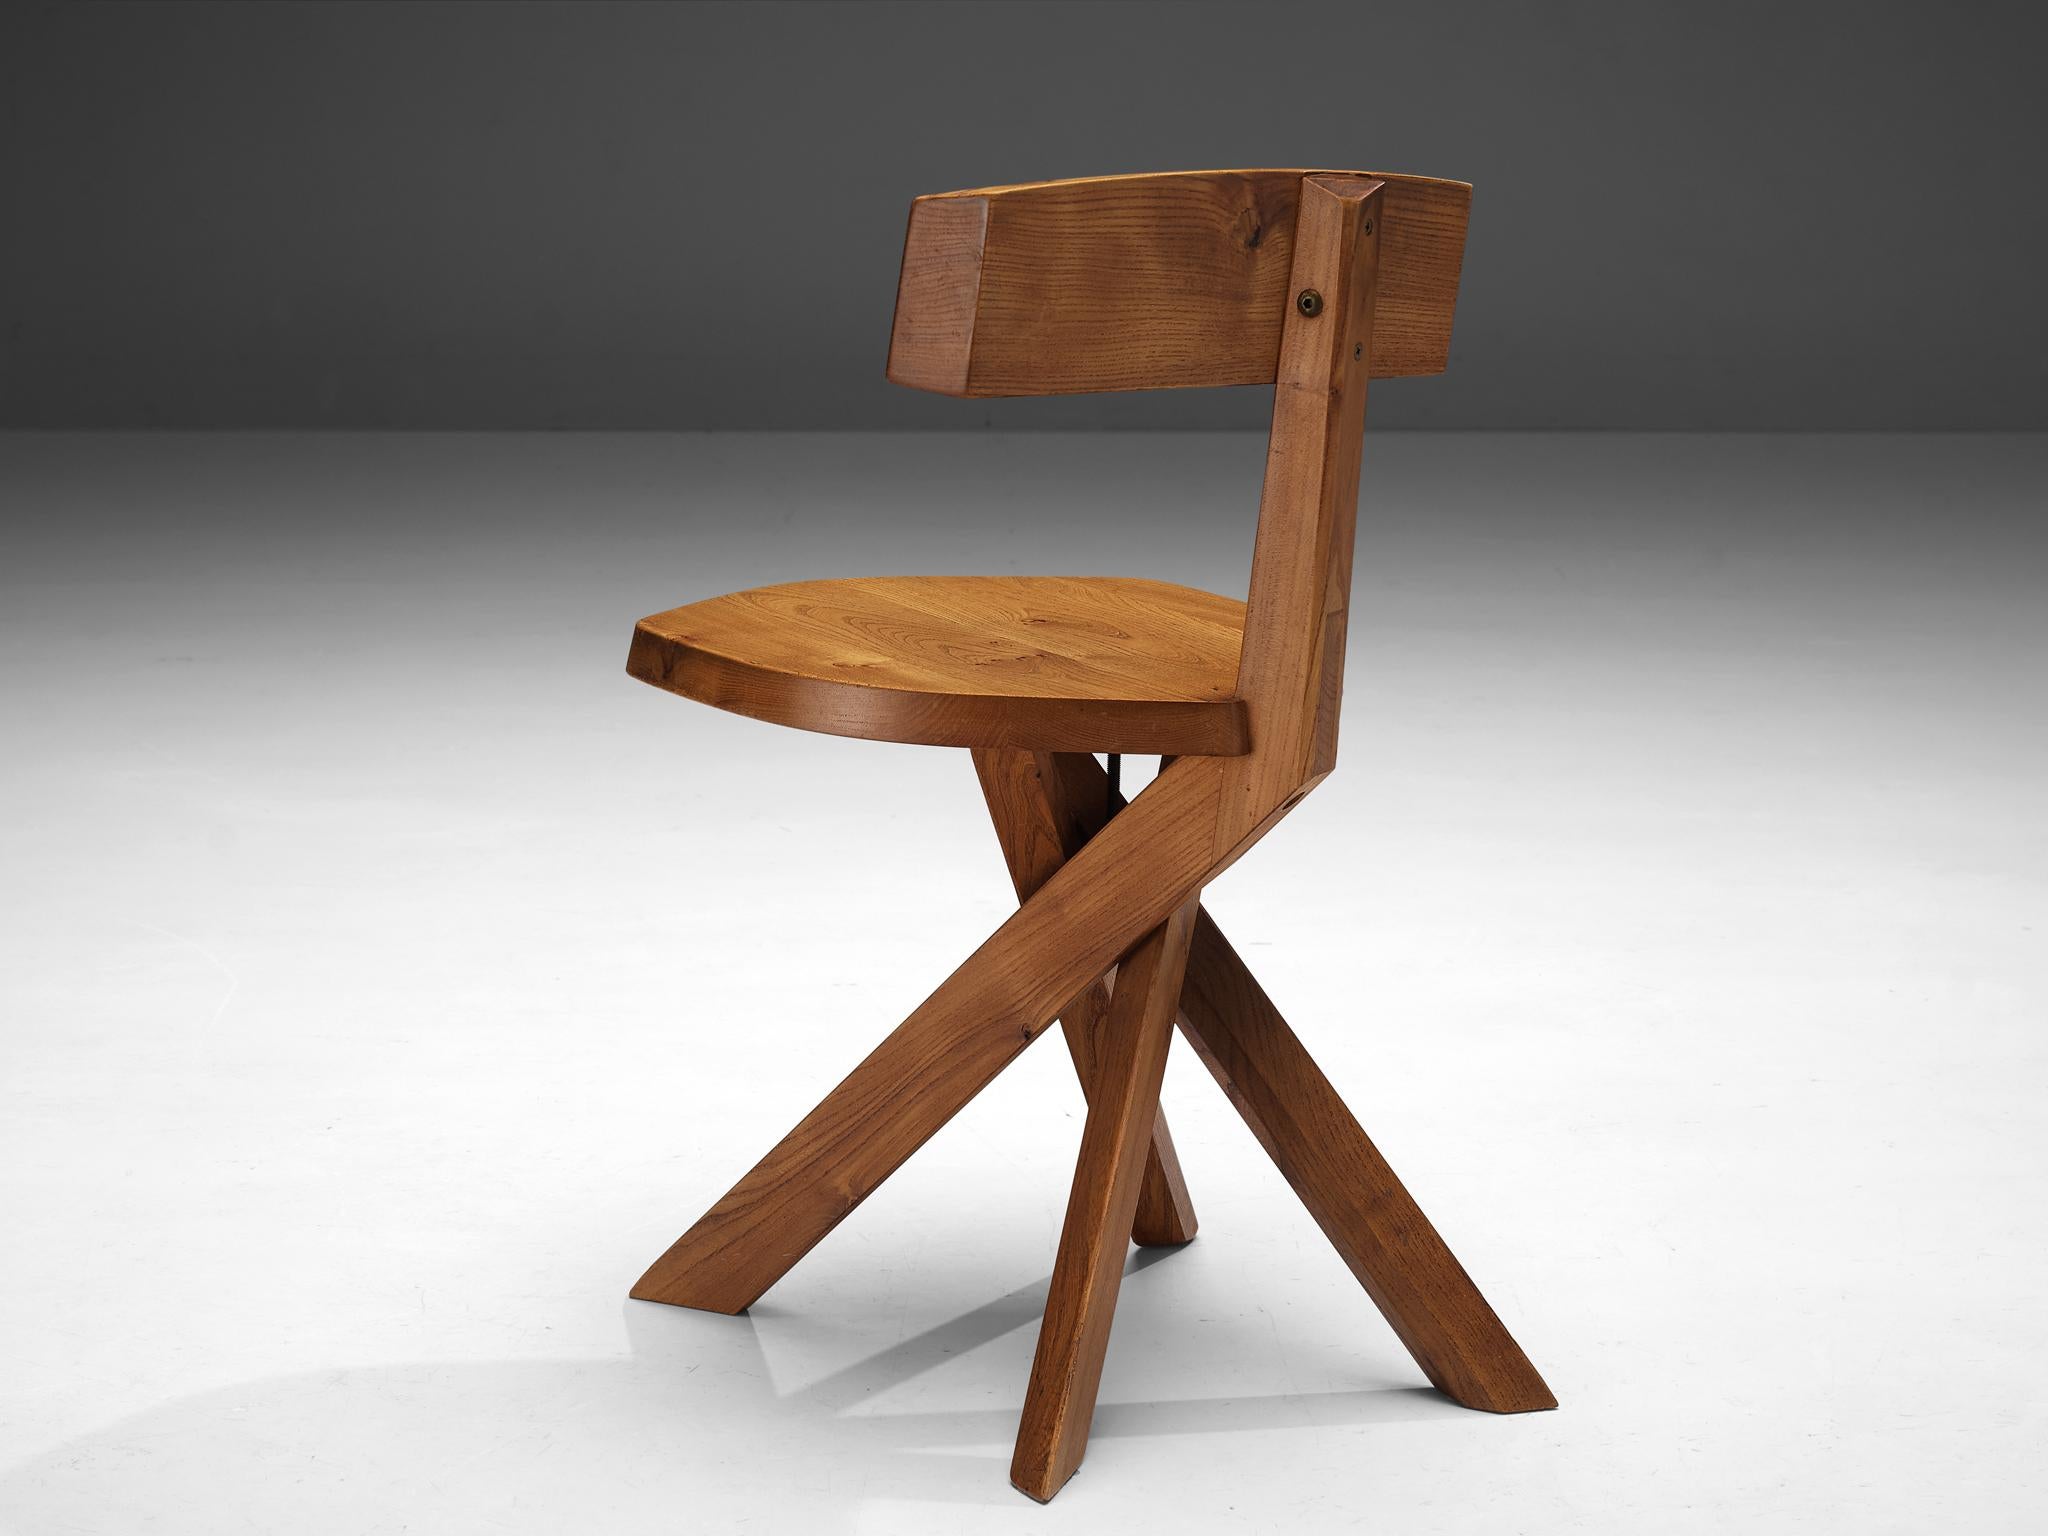 Pierre Chapo, chair, model 'S34A', elm, France, circa 1973 

This design is an early edition, created according to the original craft methodology of Pierre Chapo. This chair model 'S34A' is designed circa 1973. This asymmetrical chair executed in